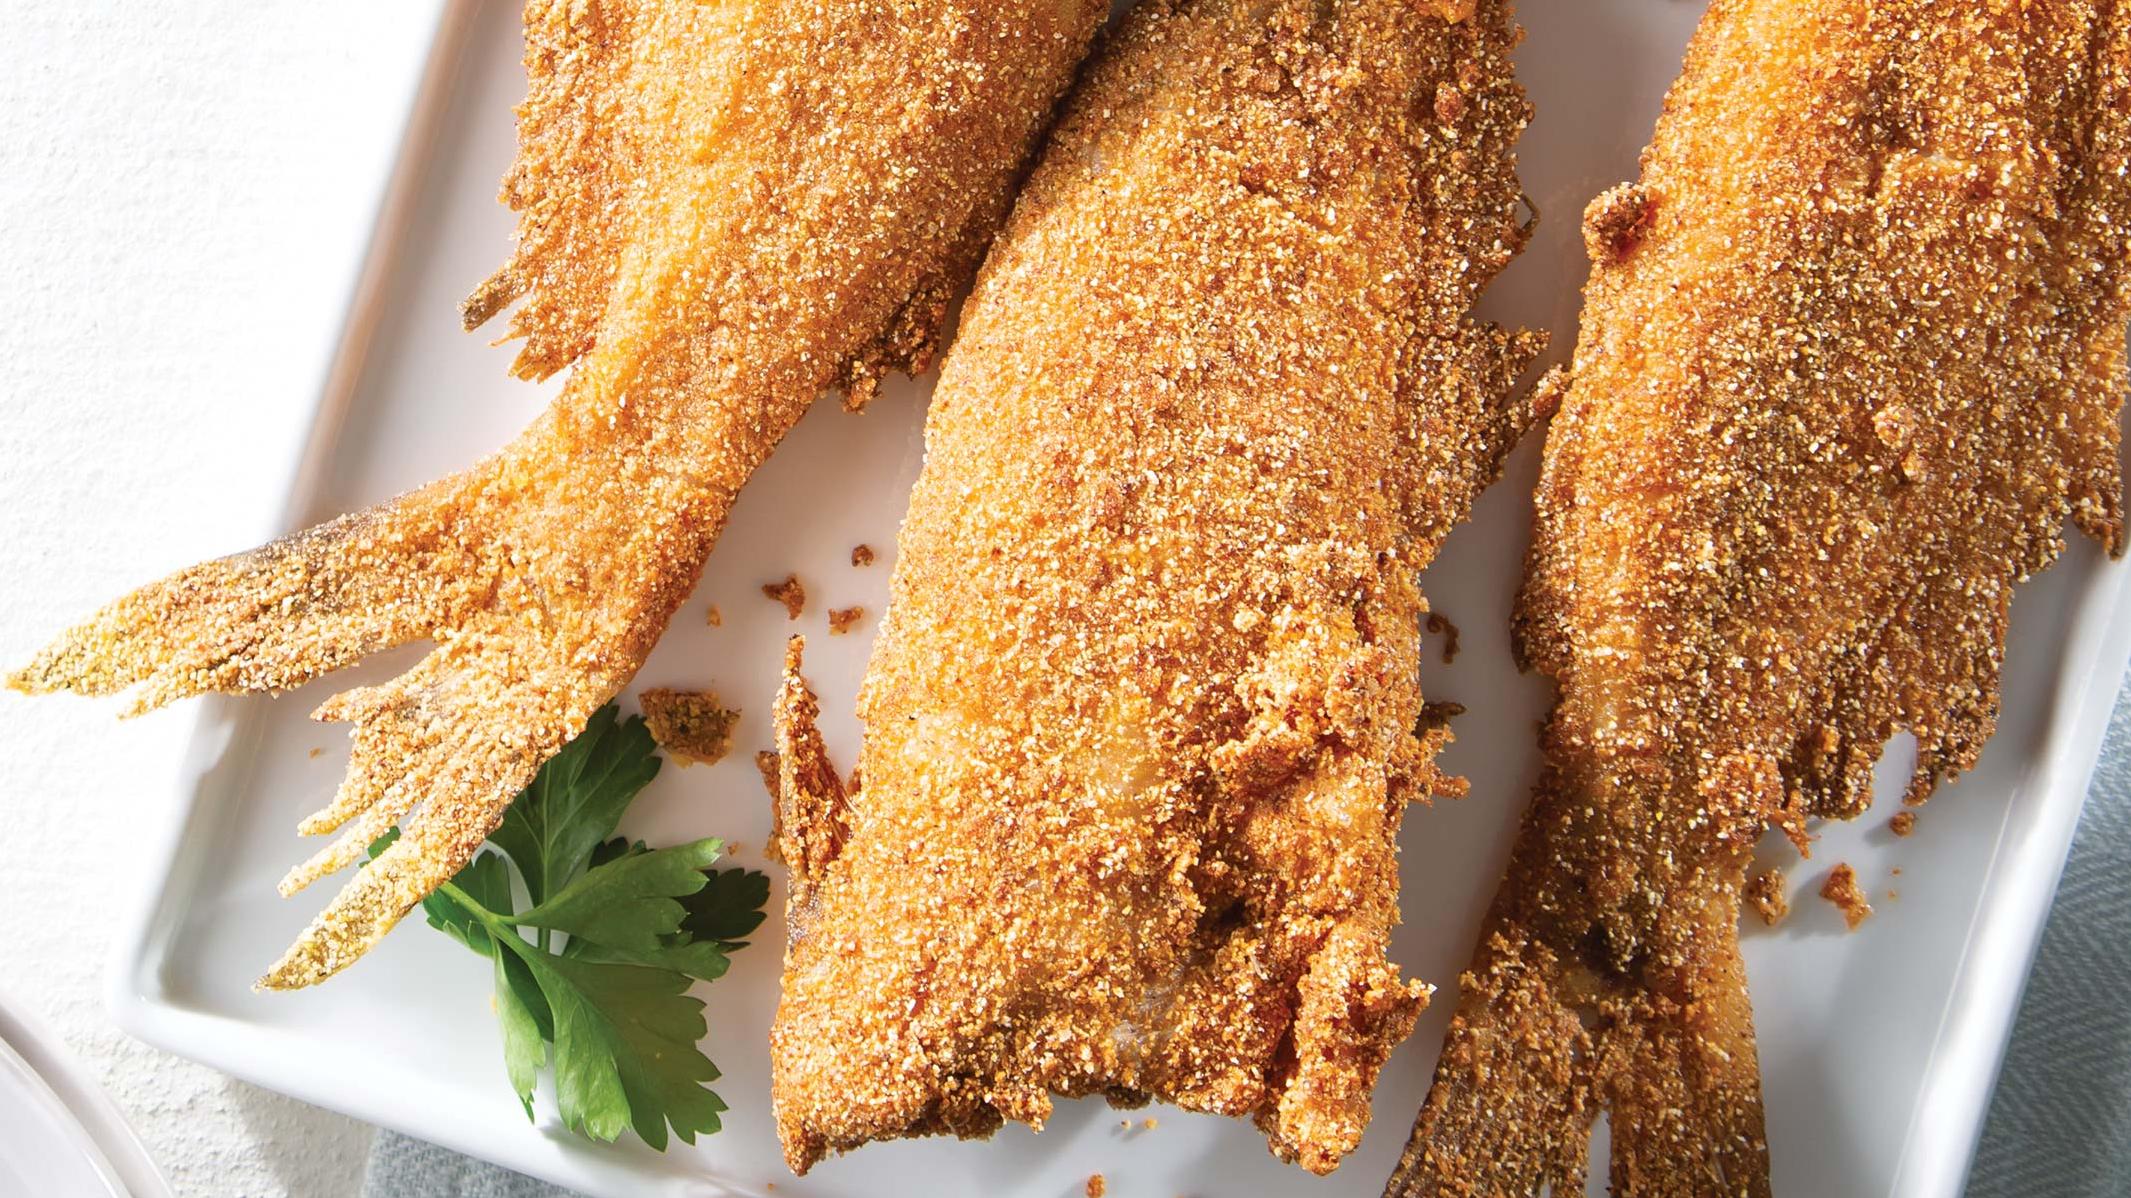  Get ready to fry up some of the tastiest catfish you've ever had!